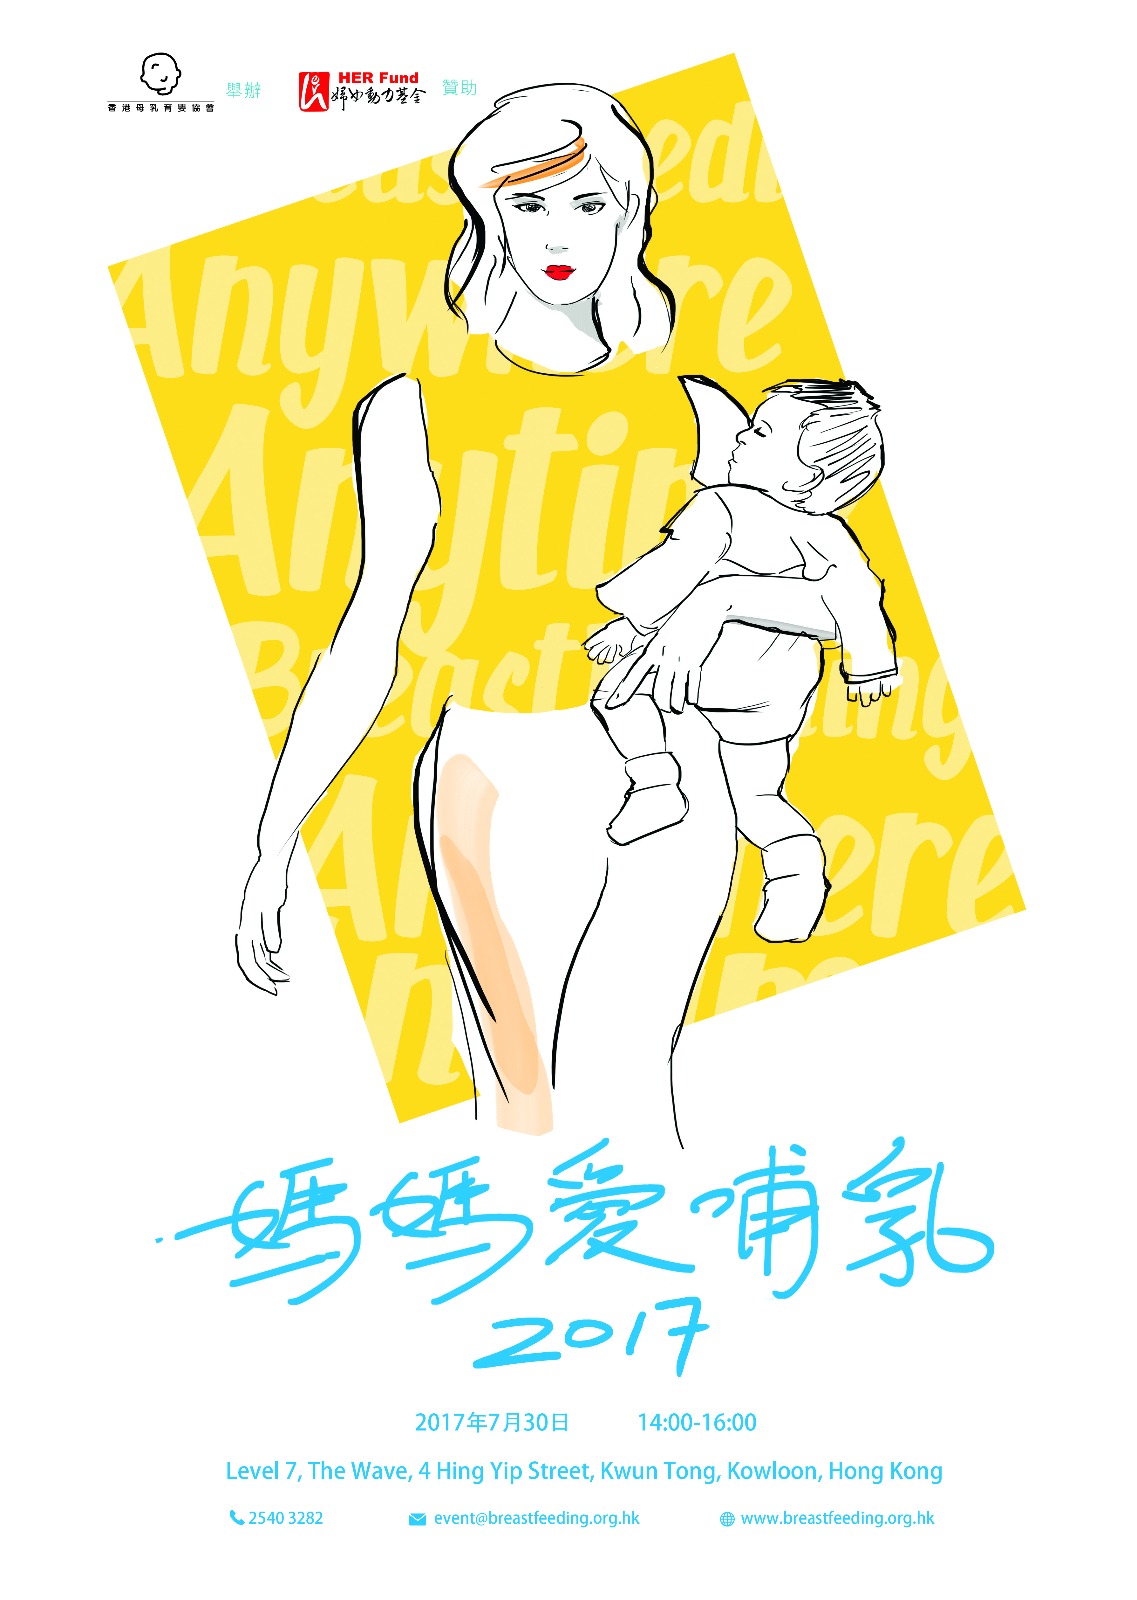 Poster of the Hong Kong Breastfeeding Mothers’ Association